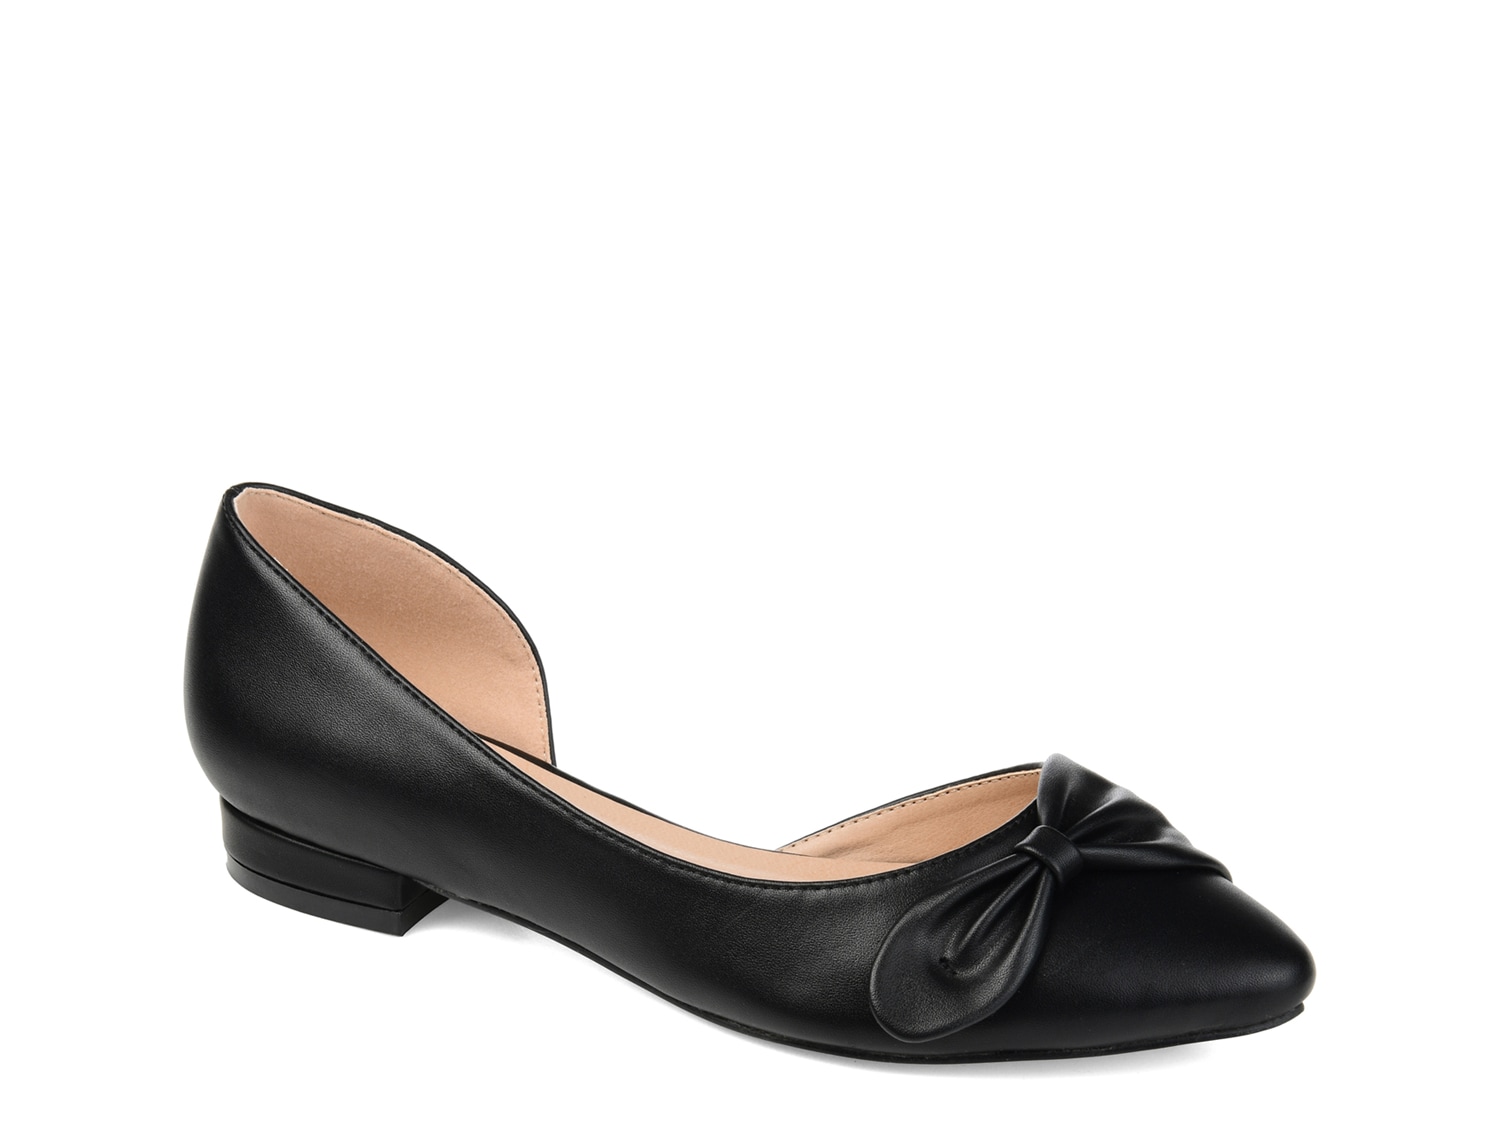 Journee Collection Abigail Flat - Free Shipping | DSW